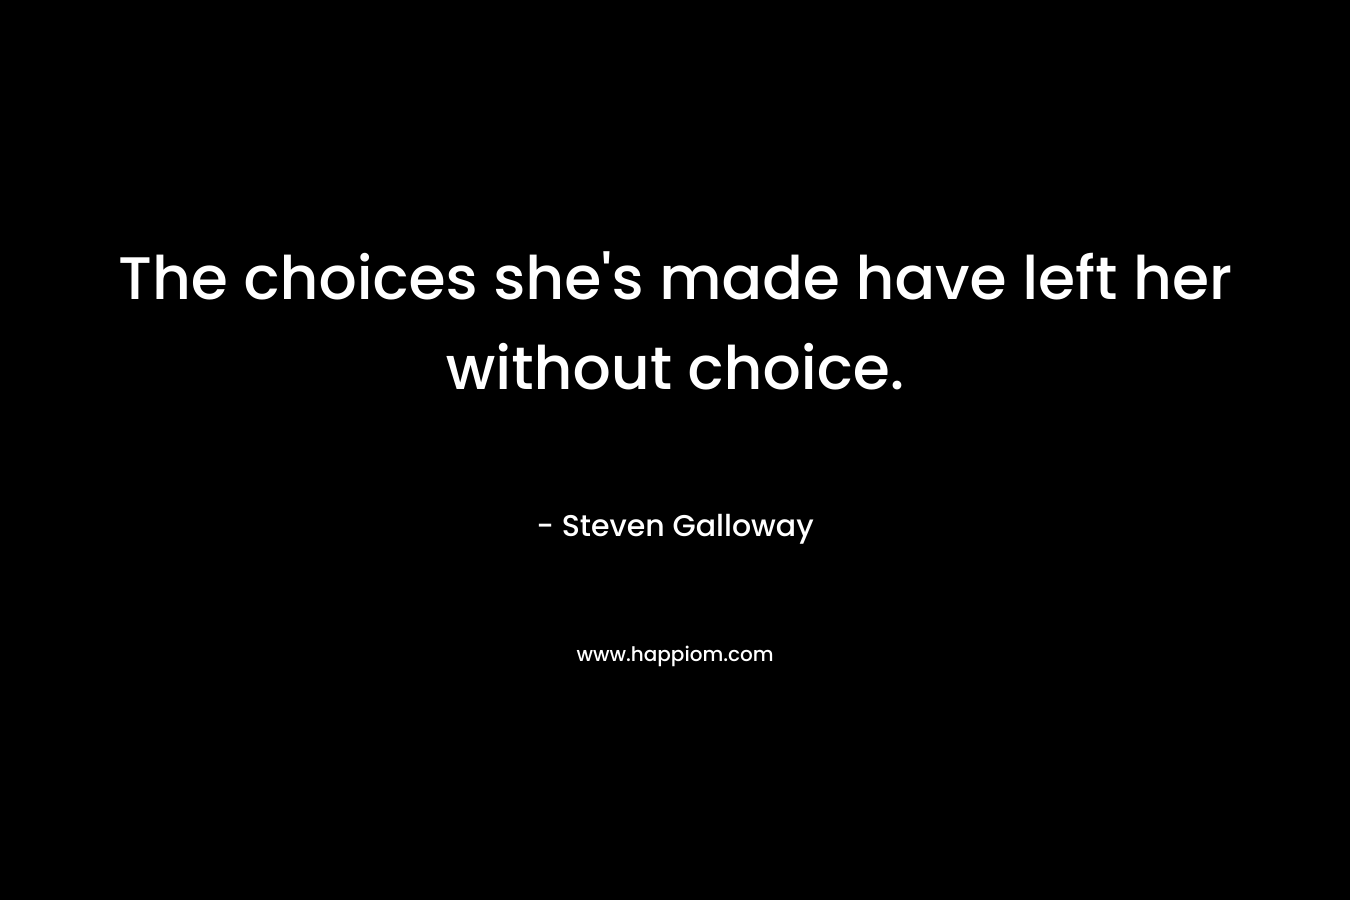 The choices she's made have left her without choice.